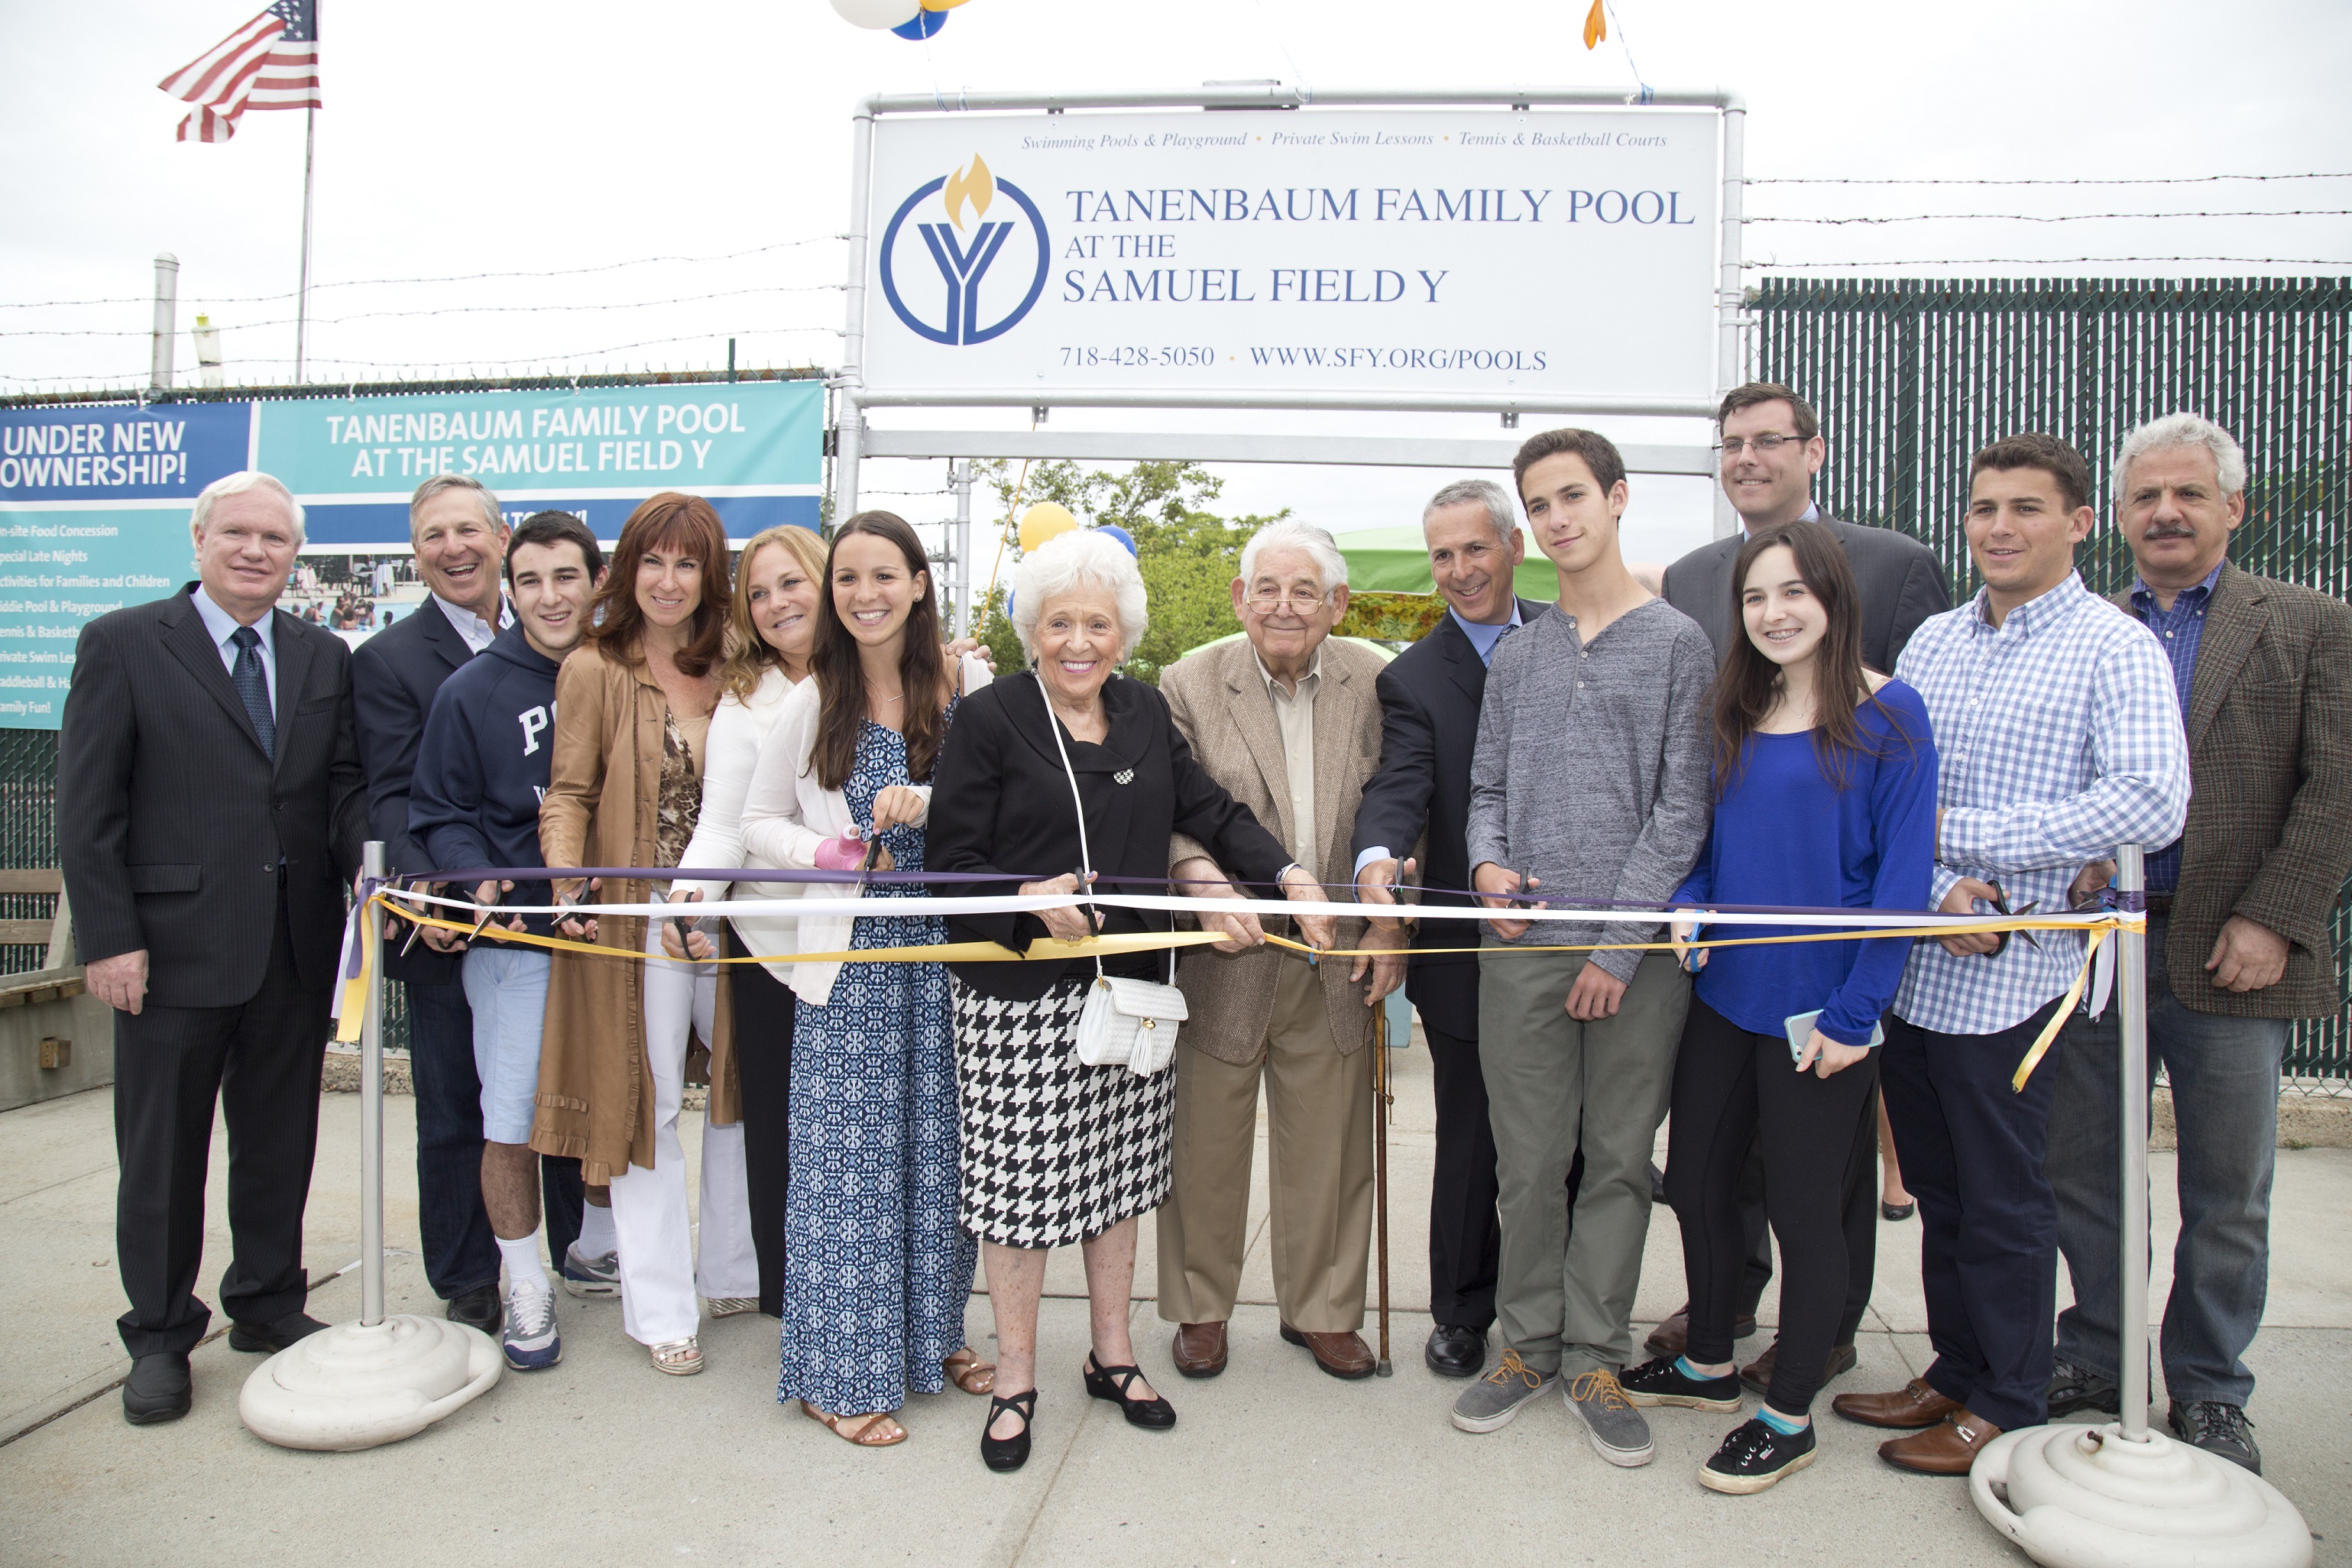 Samuel Field Y officials are among those shown at the June 2015 opening of the Tanenbaum Pool in Little Neck.